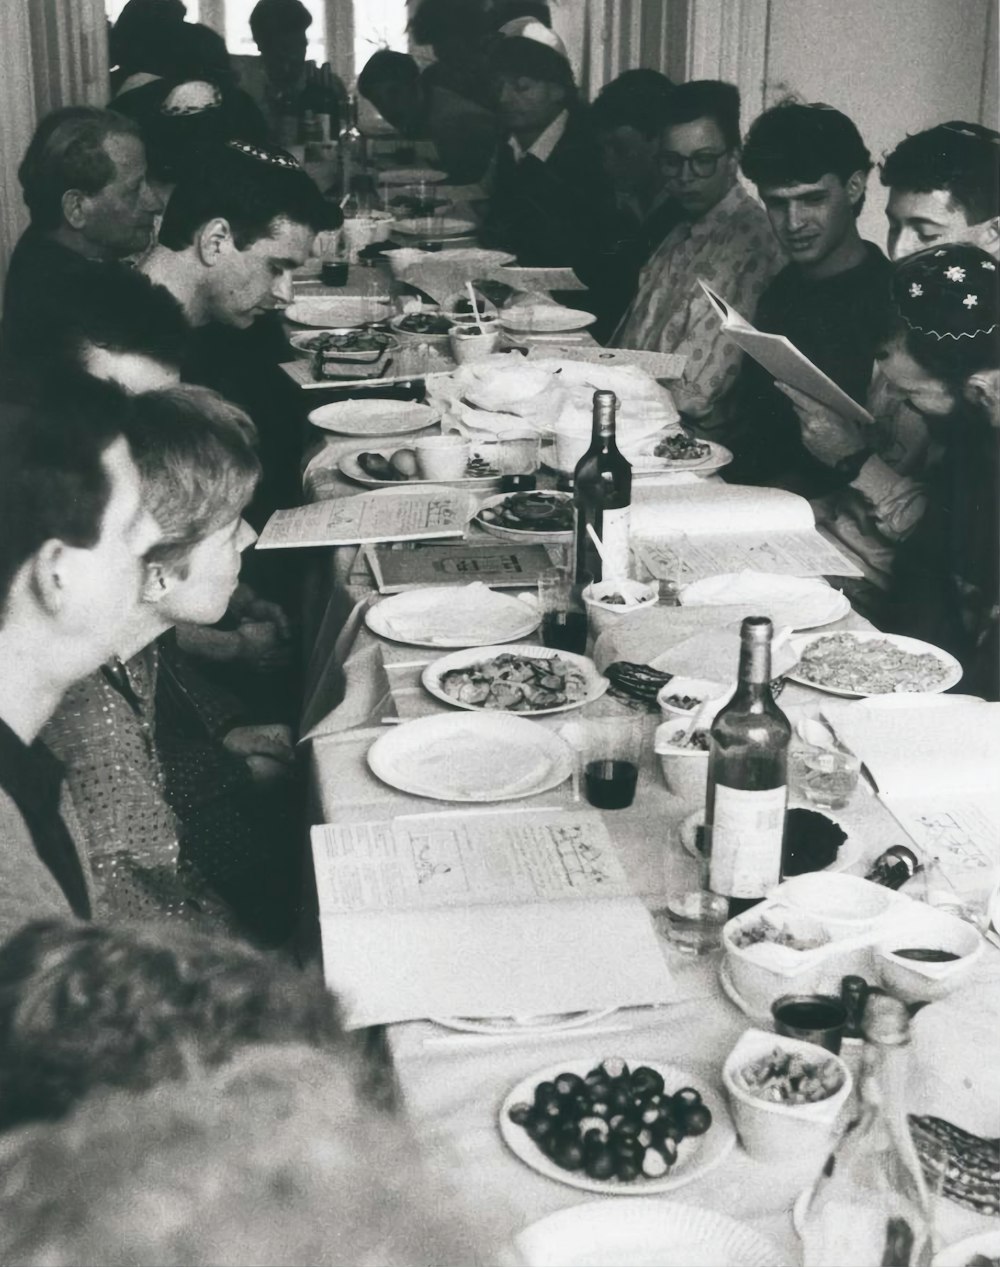 a group of people sitting at a table with food and drinks